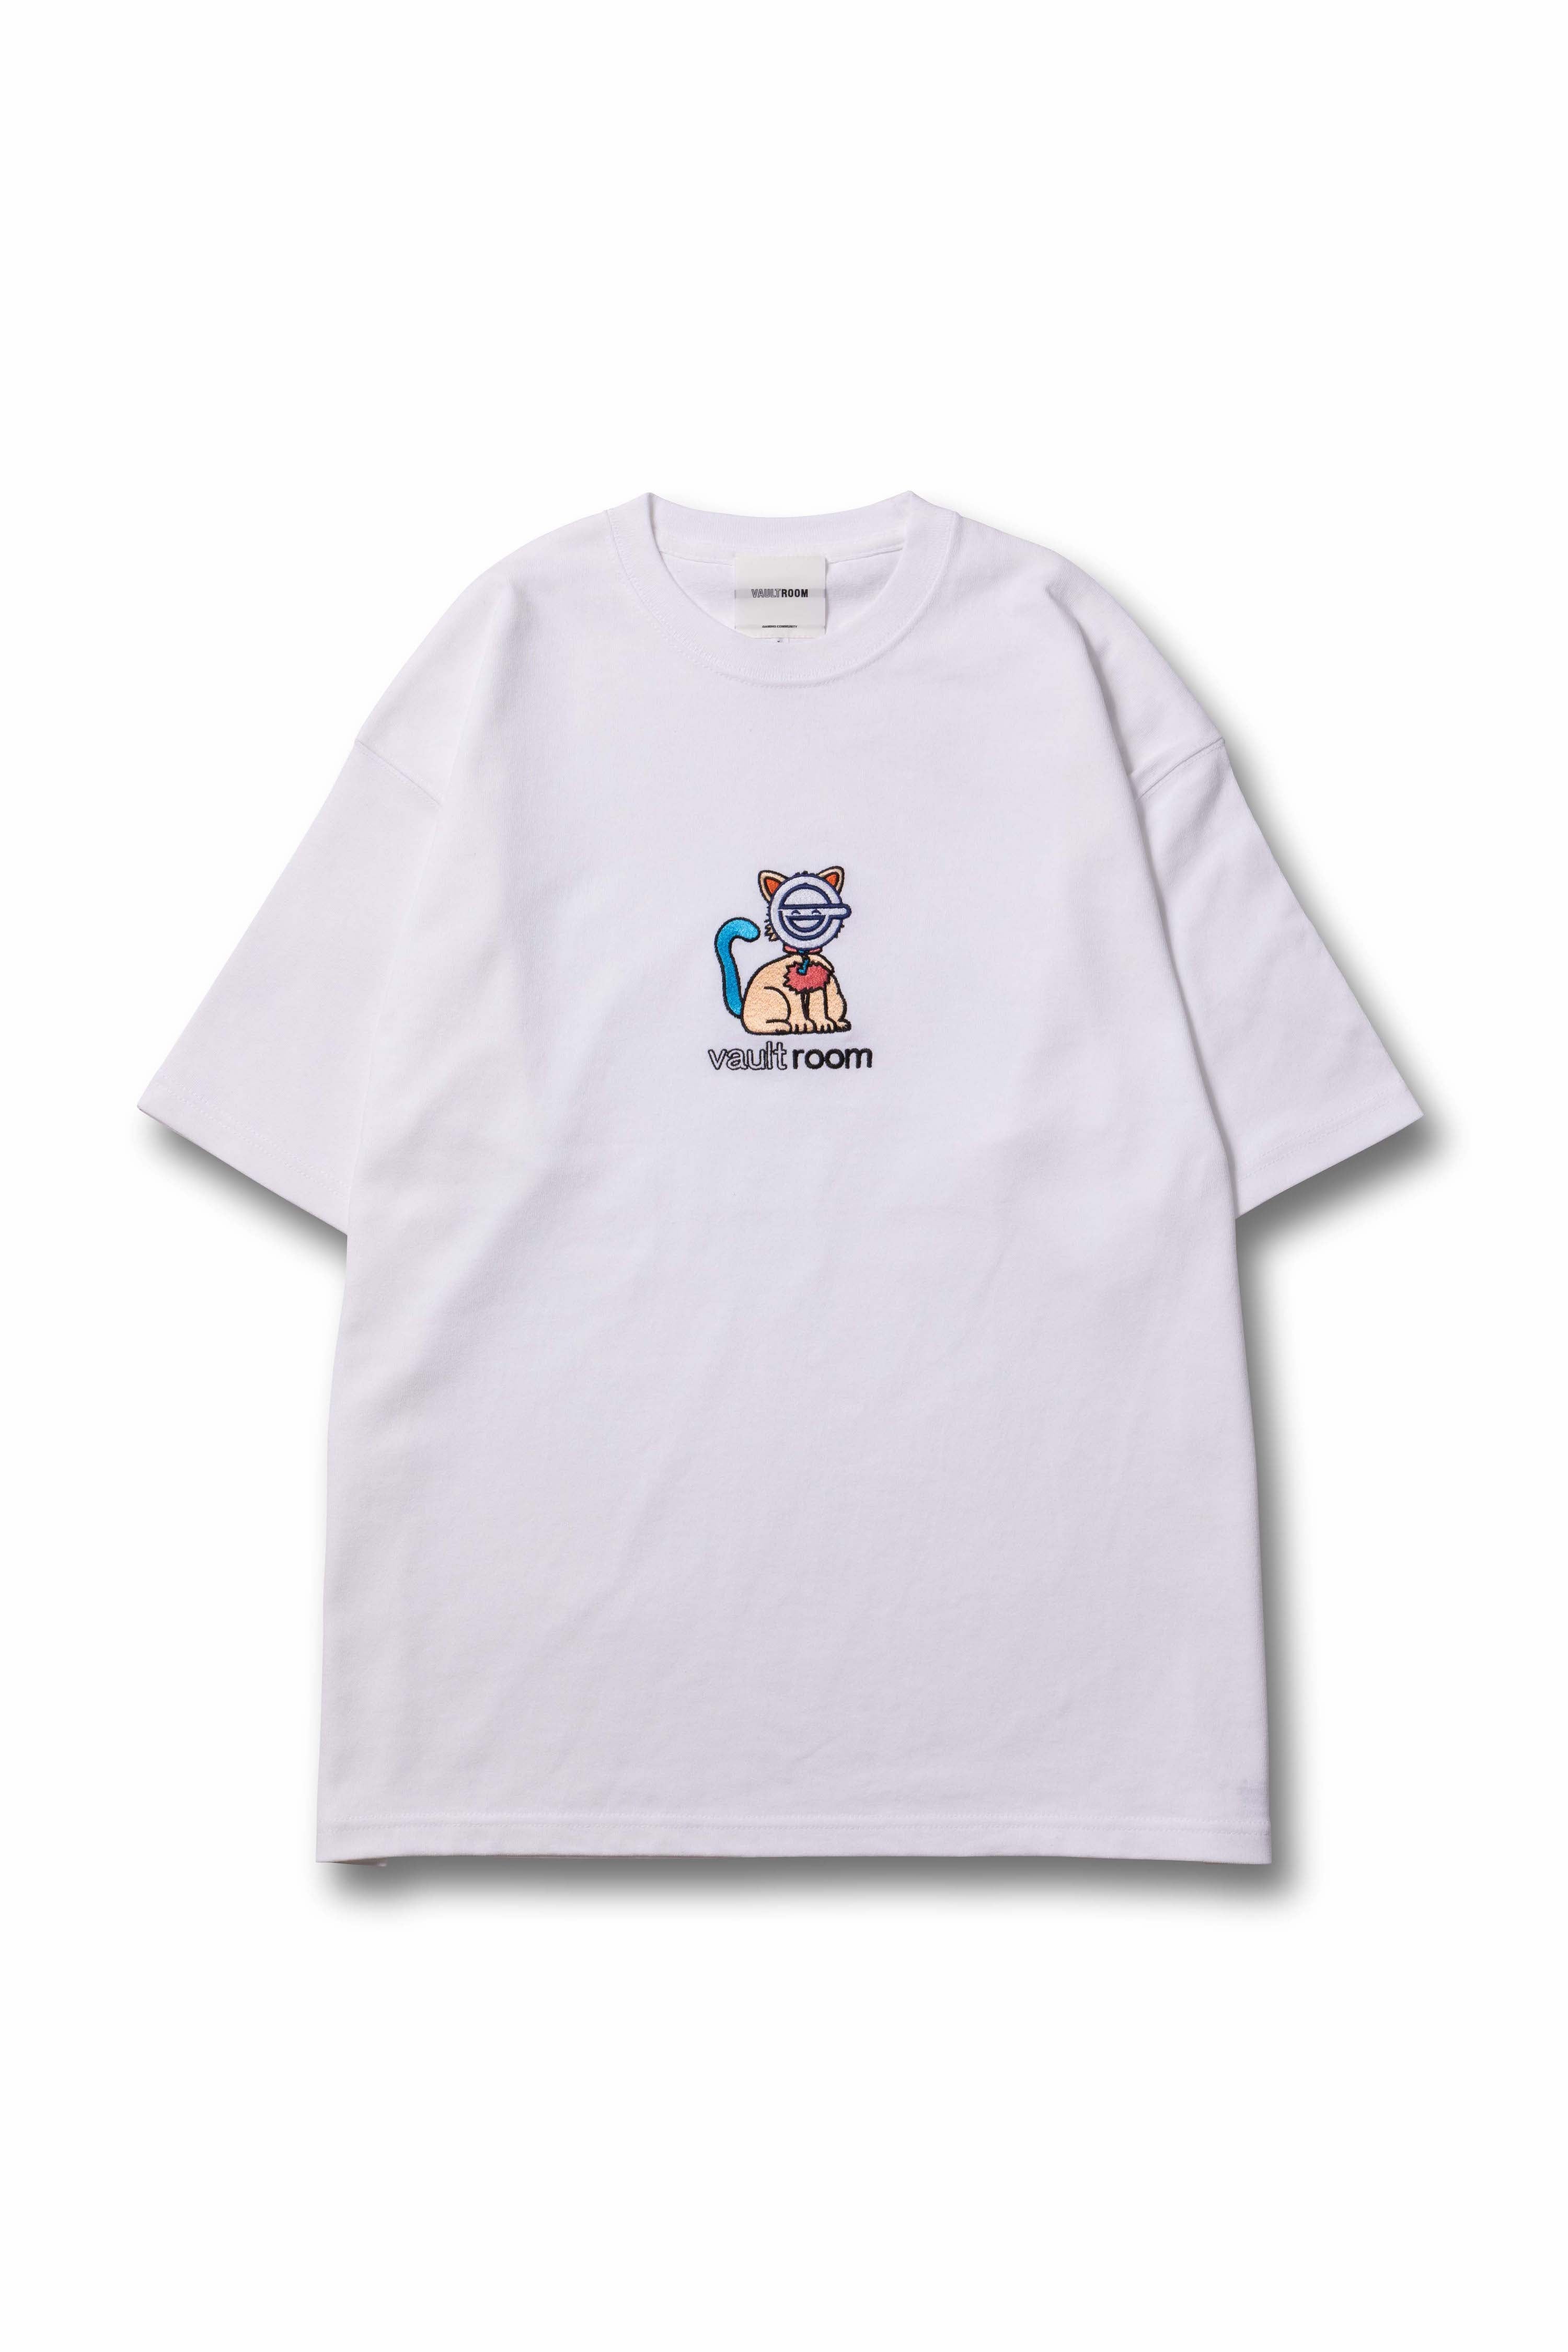 KEYCAT THE LAUGHING MAN TEE / WHT